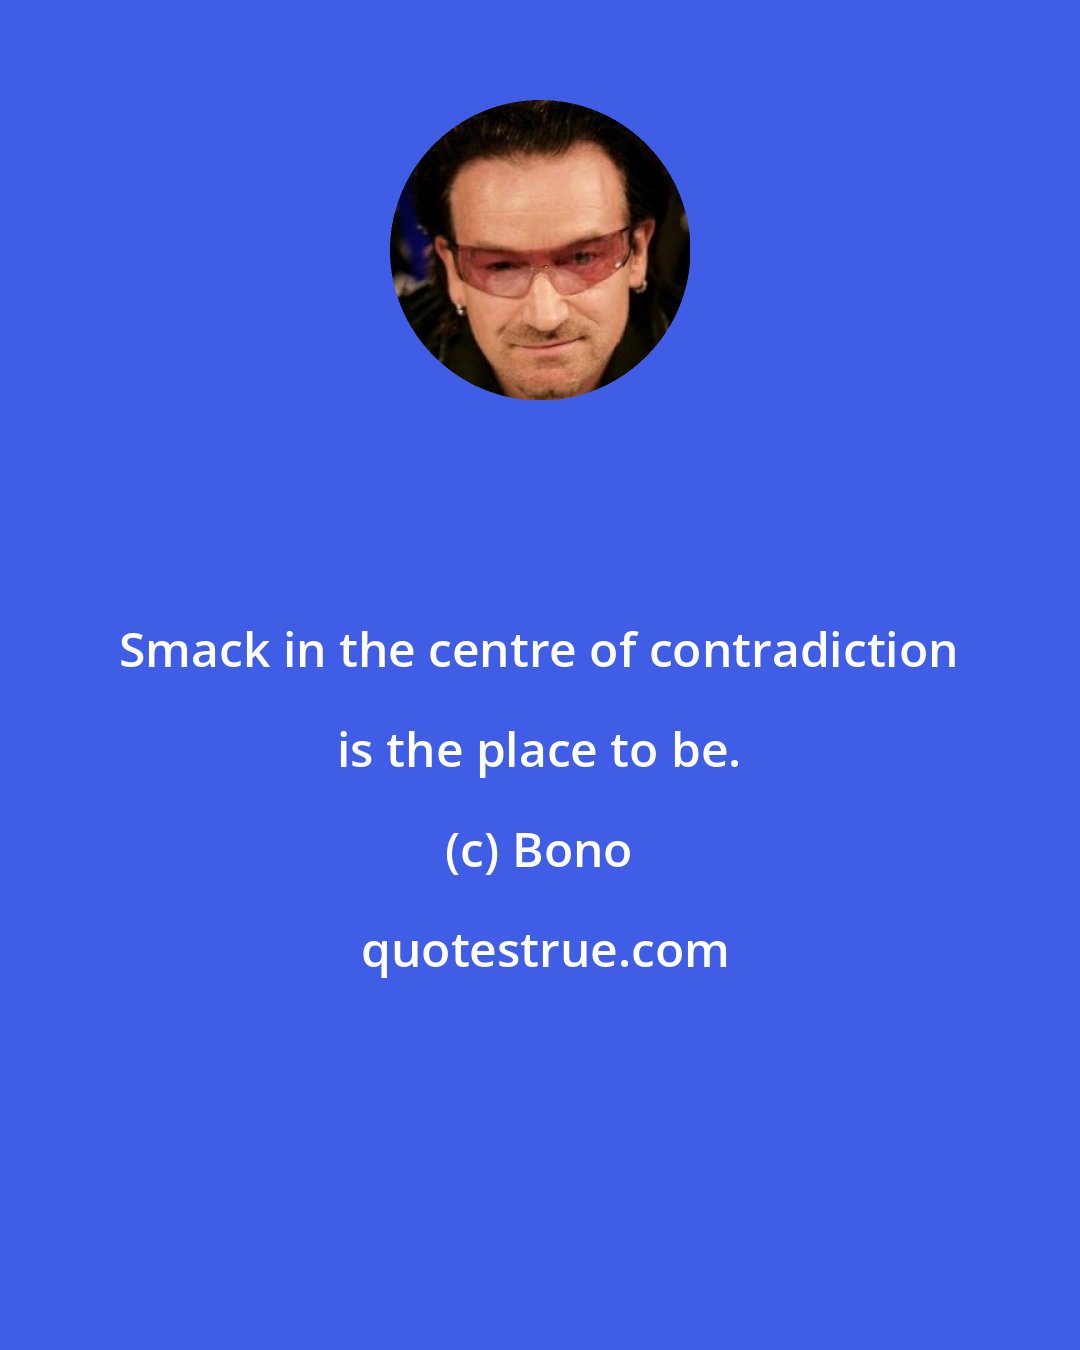 Bono: Smack in the centre of contradiction is the place to be.